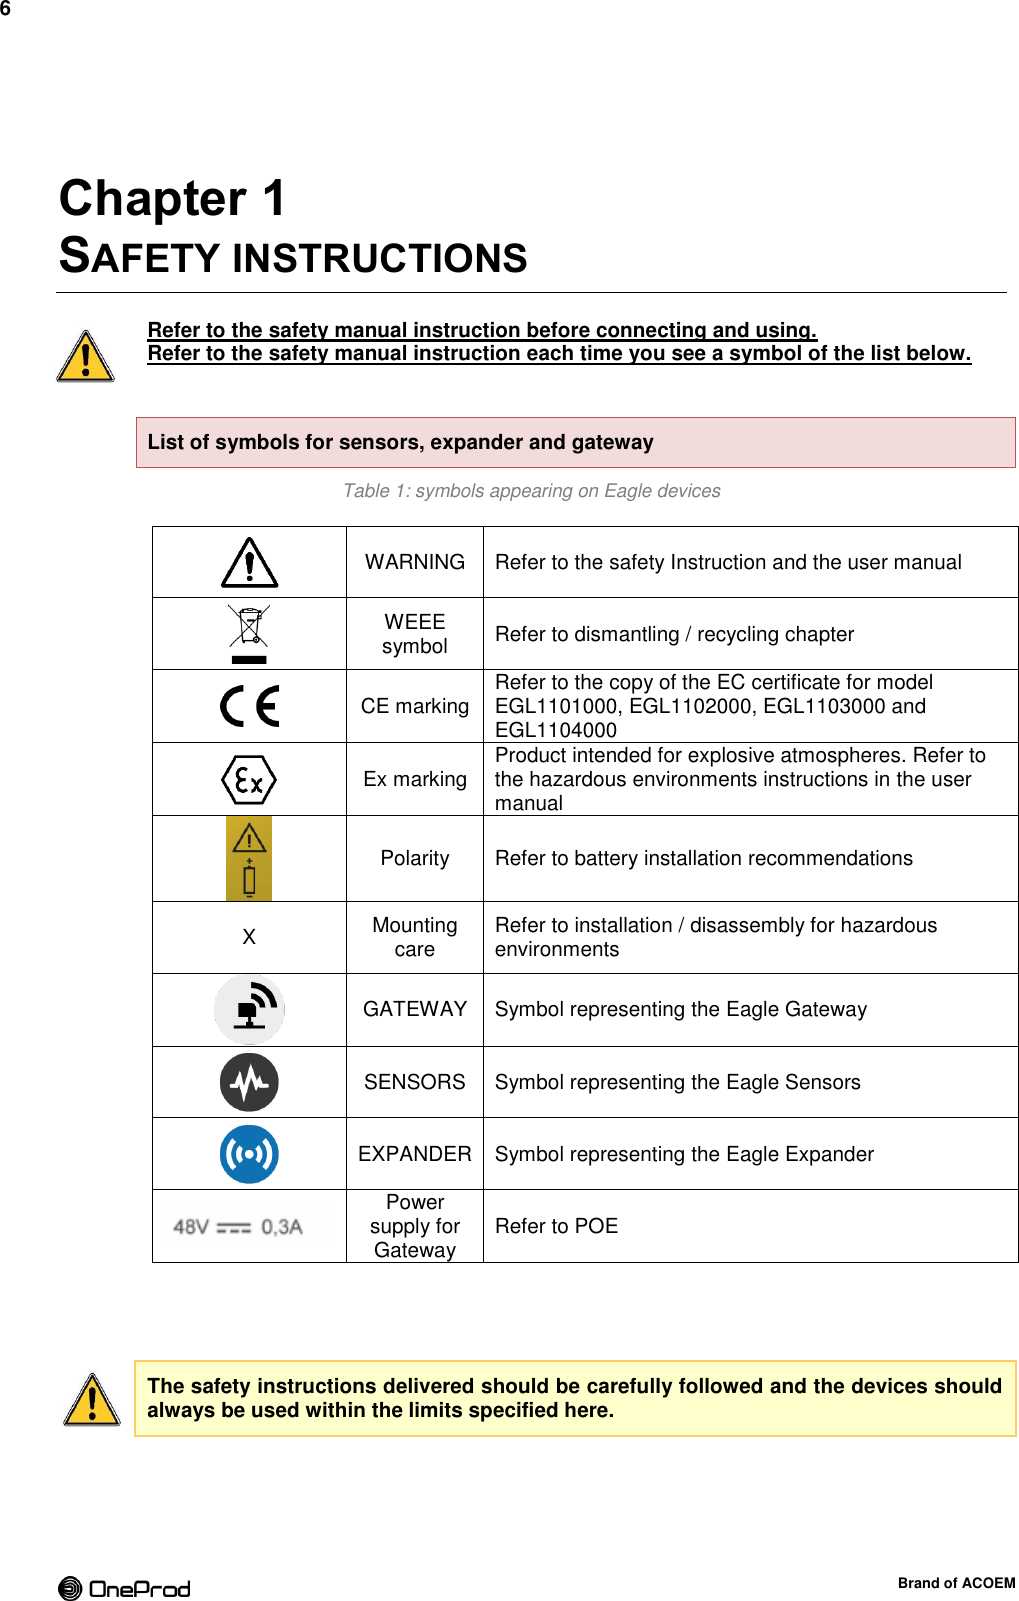 6  Brand of ACOEM   Chapter 1 SAFETY INSTRUCTIONS Refer to the safety manual instruction before connecting and using. Refer to the safety manual instruction each time you see a symbol of the list below.   List of symbols for sensors, expander and gateway Table 1: symbols appearing on Eagle devices  WARNING Refer to the safety Instruction and the user manual  WEEE symbol Refer to dismantling / recycling chapter  CE marking Refer to the copy of the EC certificate for model EGL1101000, EGL1102000, EGL1103000 and EGL1104000  Ex marking Product intended for explosive atmospheres. Refer to the hazardous environments instructions in the user manual  Polarity Refer to battery installation recommendations X Mounting care Refer to installation / disassembly for hazardous environments  GATEWAY Symbol representing the Eagle Gateway  SENSORS Symbol representing the Eagle Sensors  EXPANDER Symbol representing the Eagle Expander  Power supply for Gateway Refer to POE   The safety instructions delivered should be carefully followed and the devices should always be used within the limits specified here.     